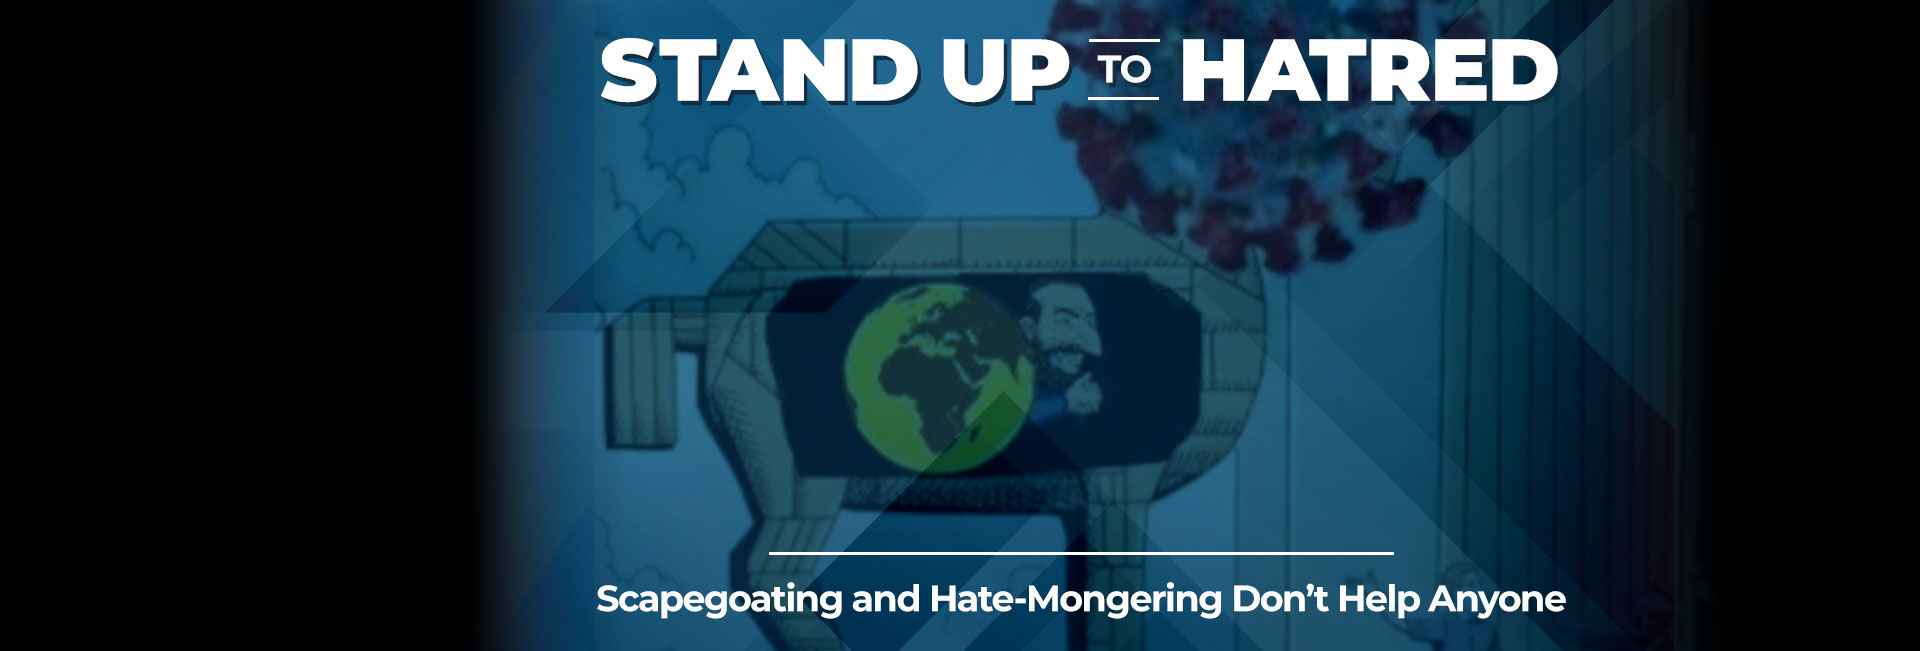 Scapegoating and Hate-Mongering Don’t Help Anyone